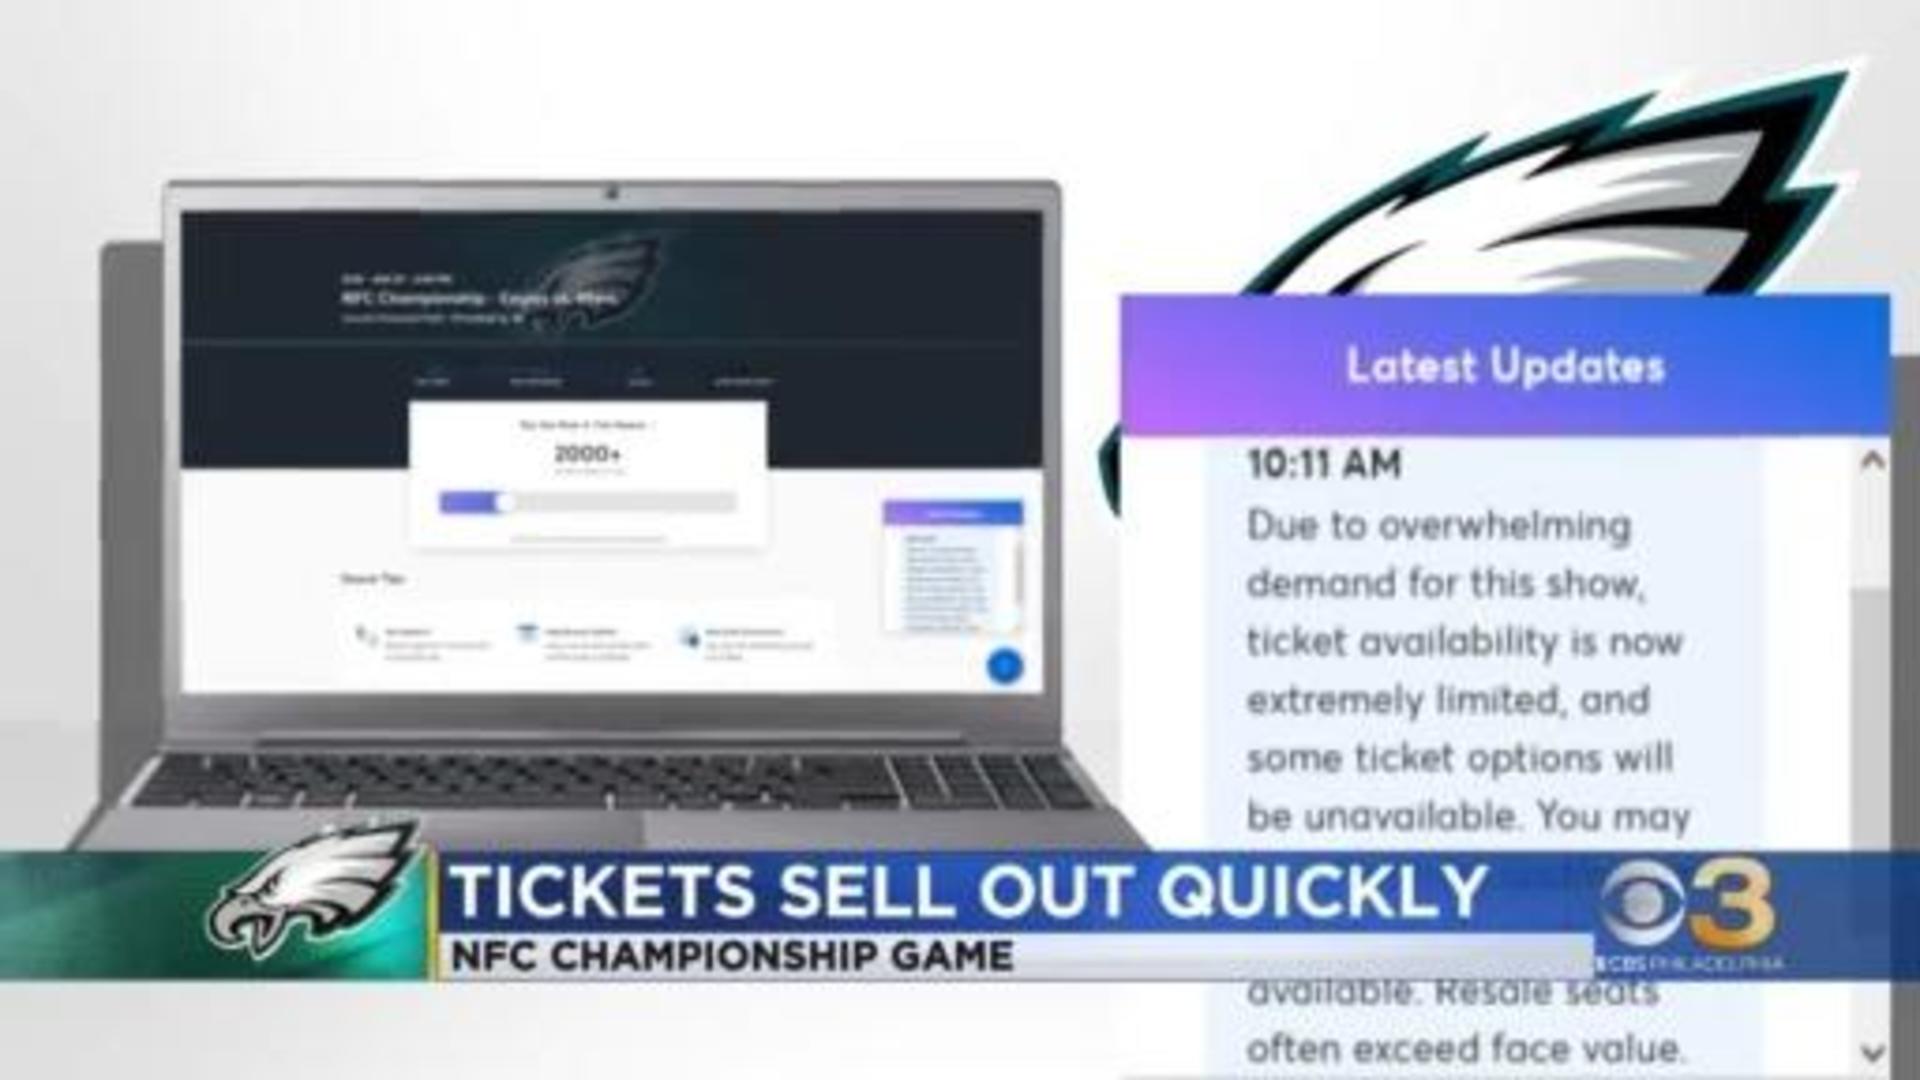 Tickets sell out quickly for Eagles-49ers NFC game - CBS Philadelphia